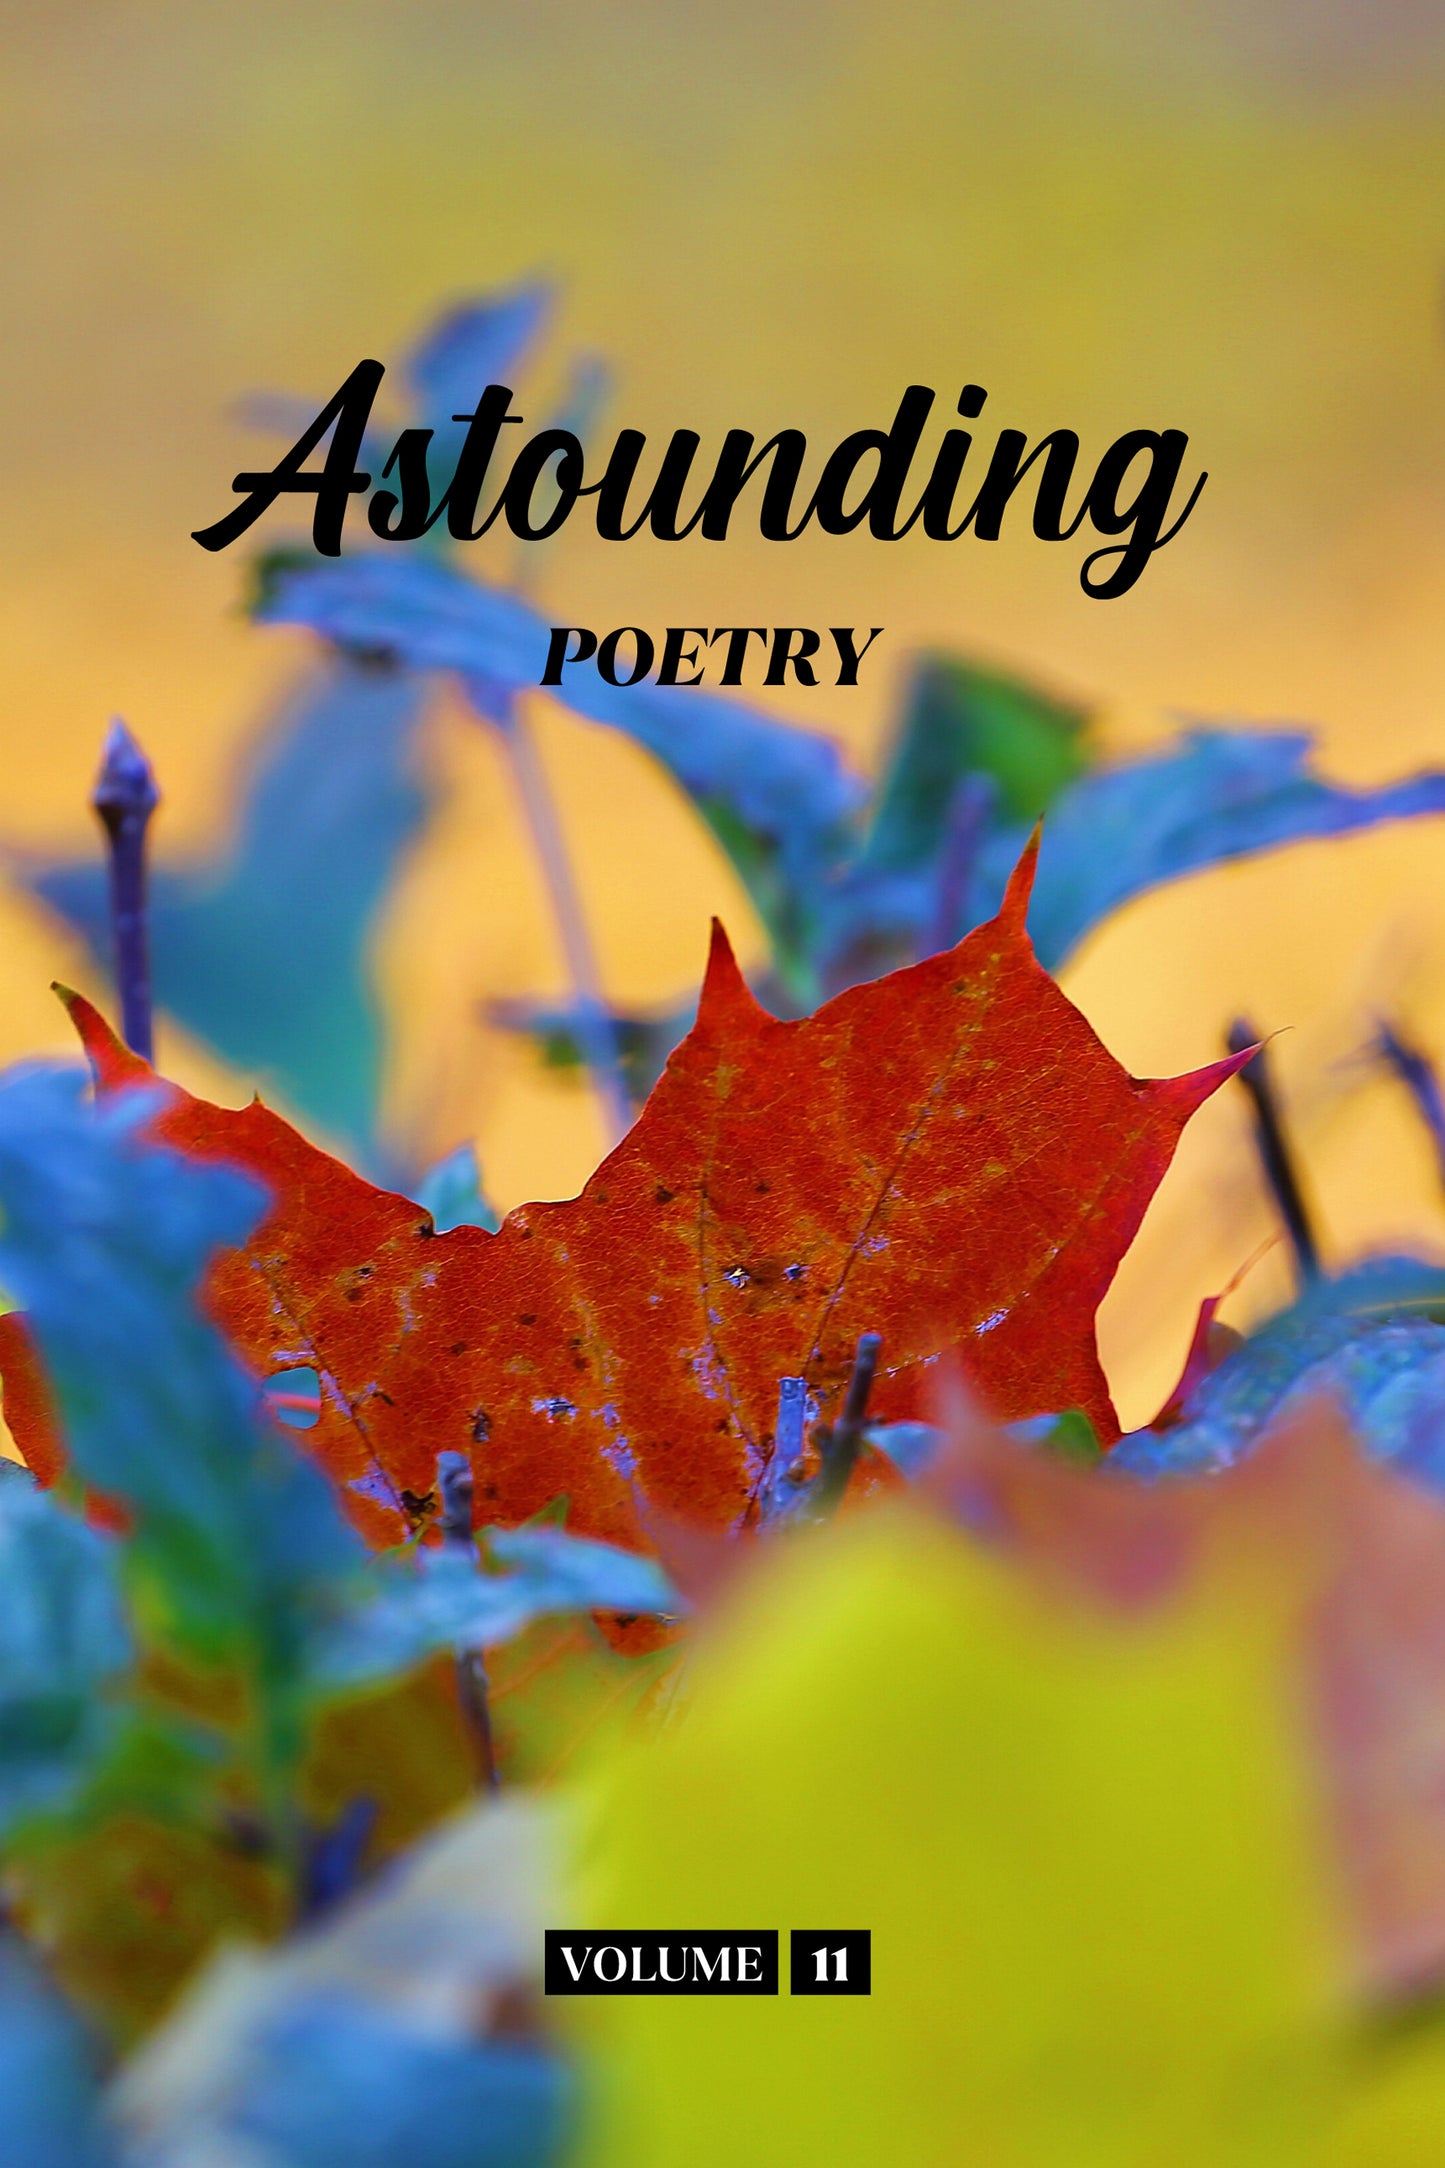 Astounding Poetry (Volume 11) - Physical Book